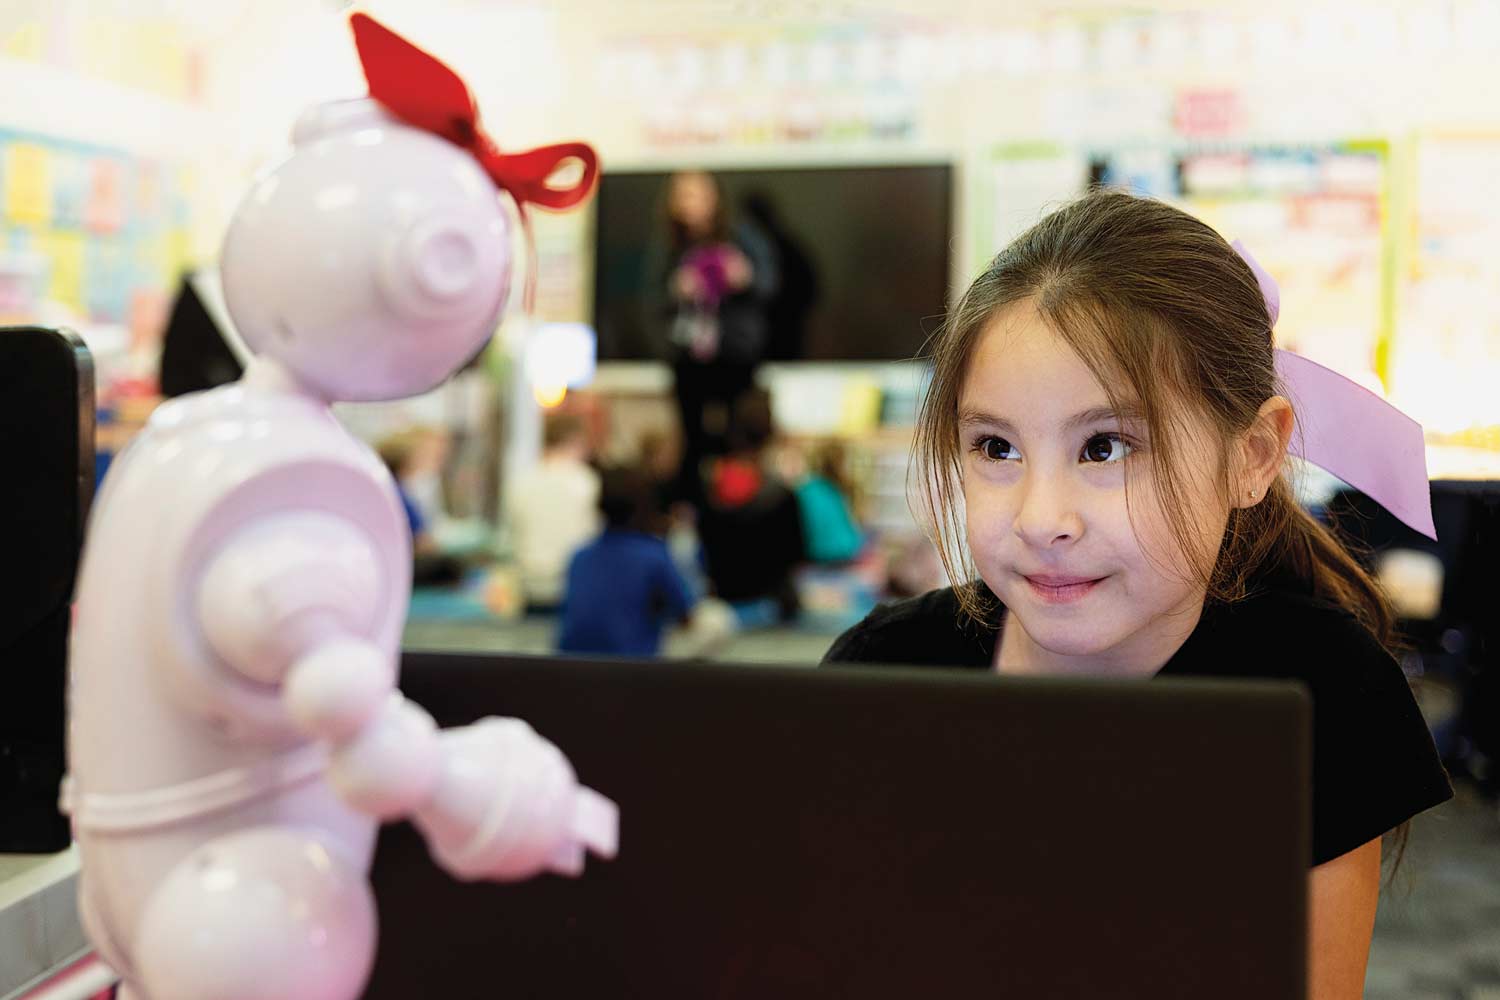 ABii robot interacts with an elementary school student.